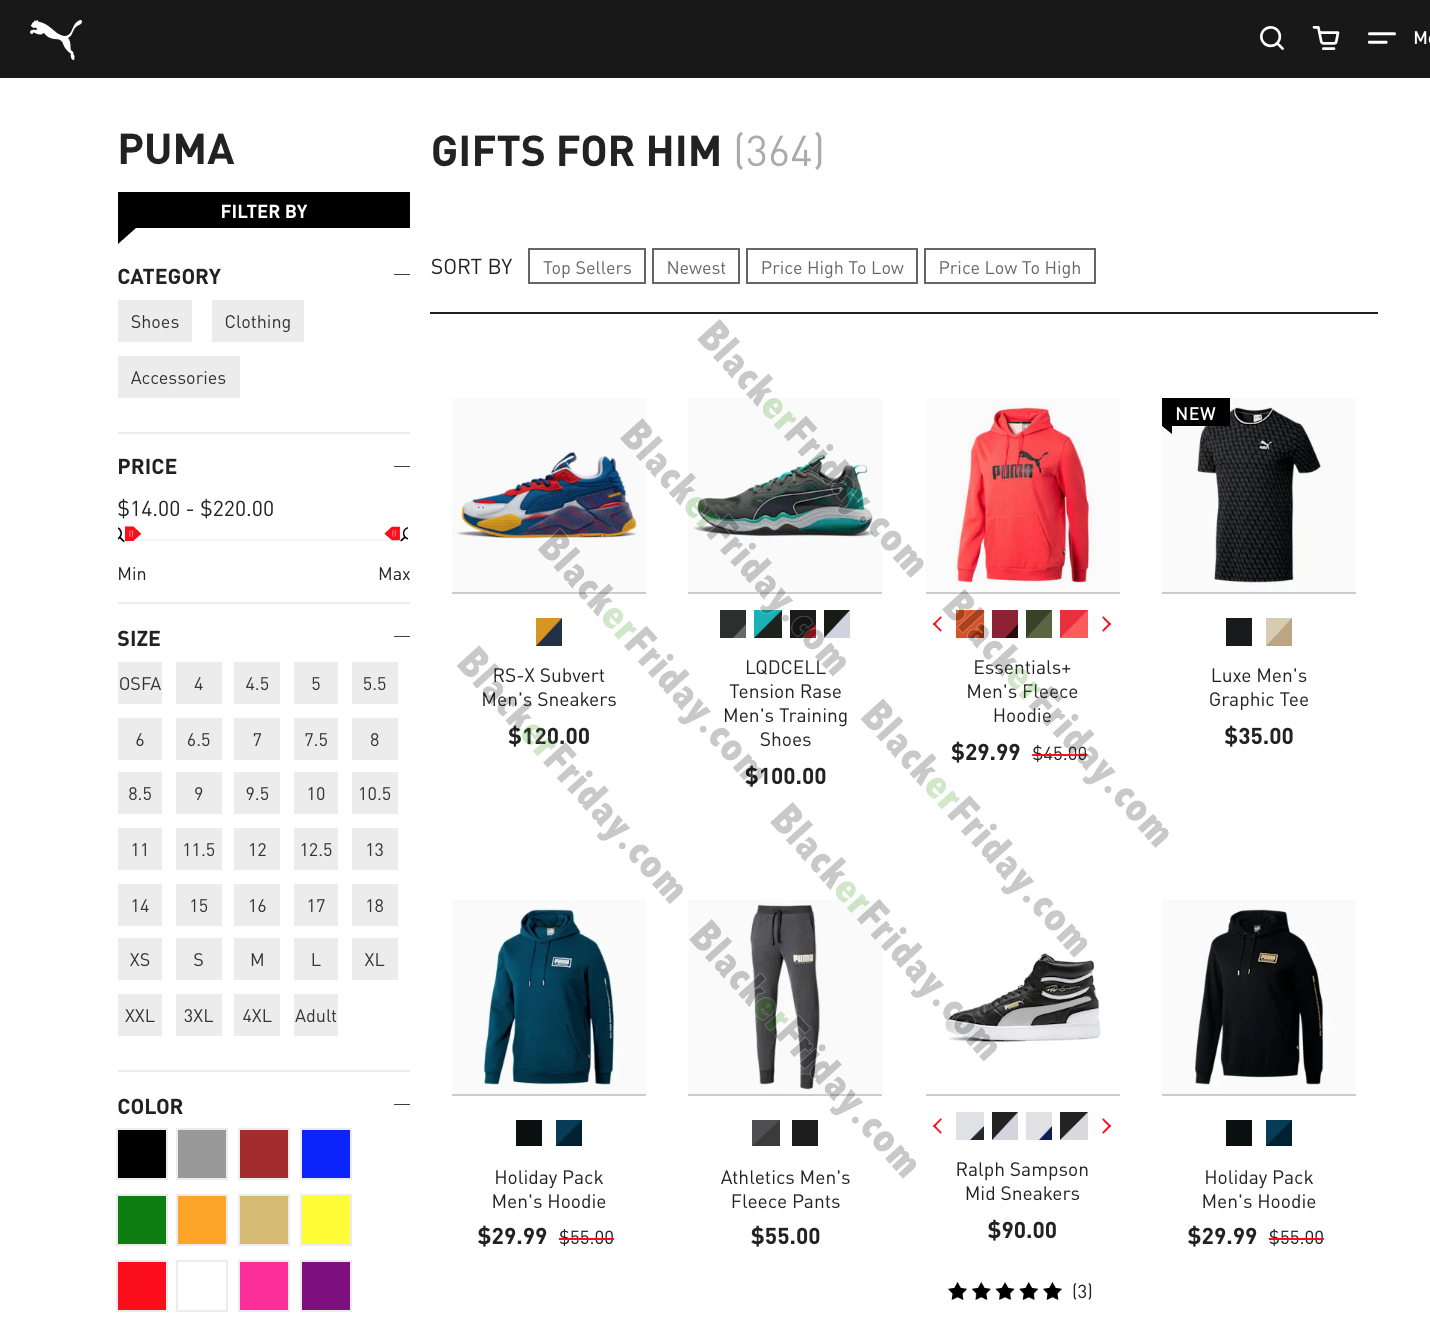 Puma Black Friday 2020 Sale - What to 